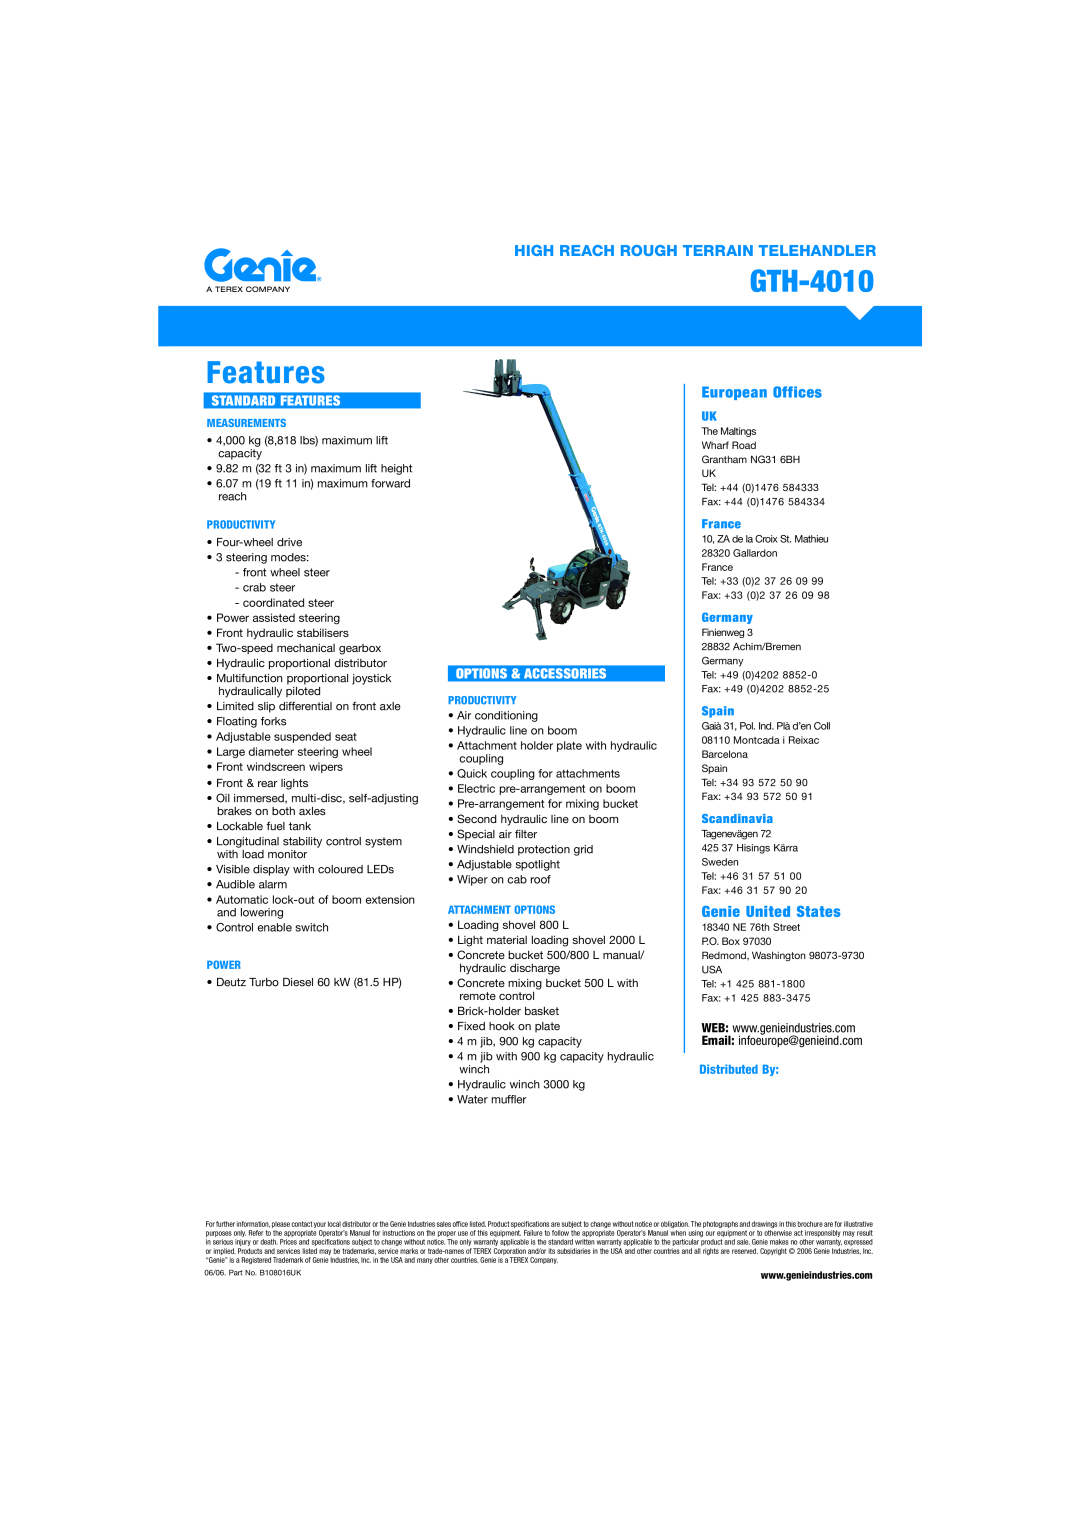 Genie GTH-4010 Standard Features, Options & Accessories, Email infoeurope@genieind.com, European Offices, France 